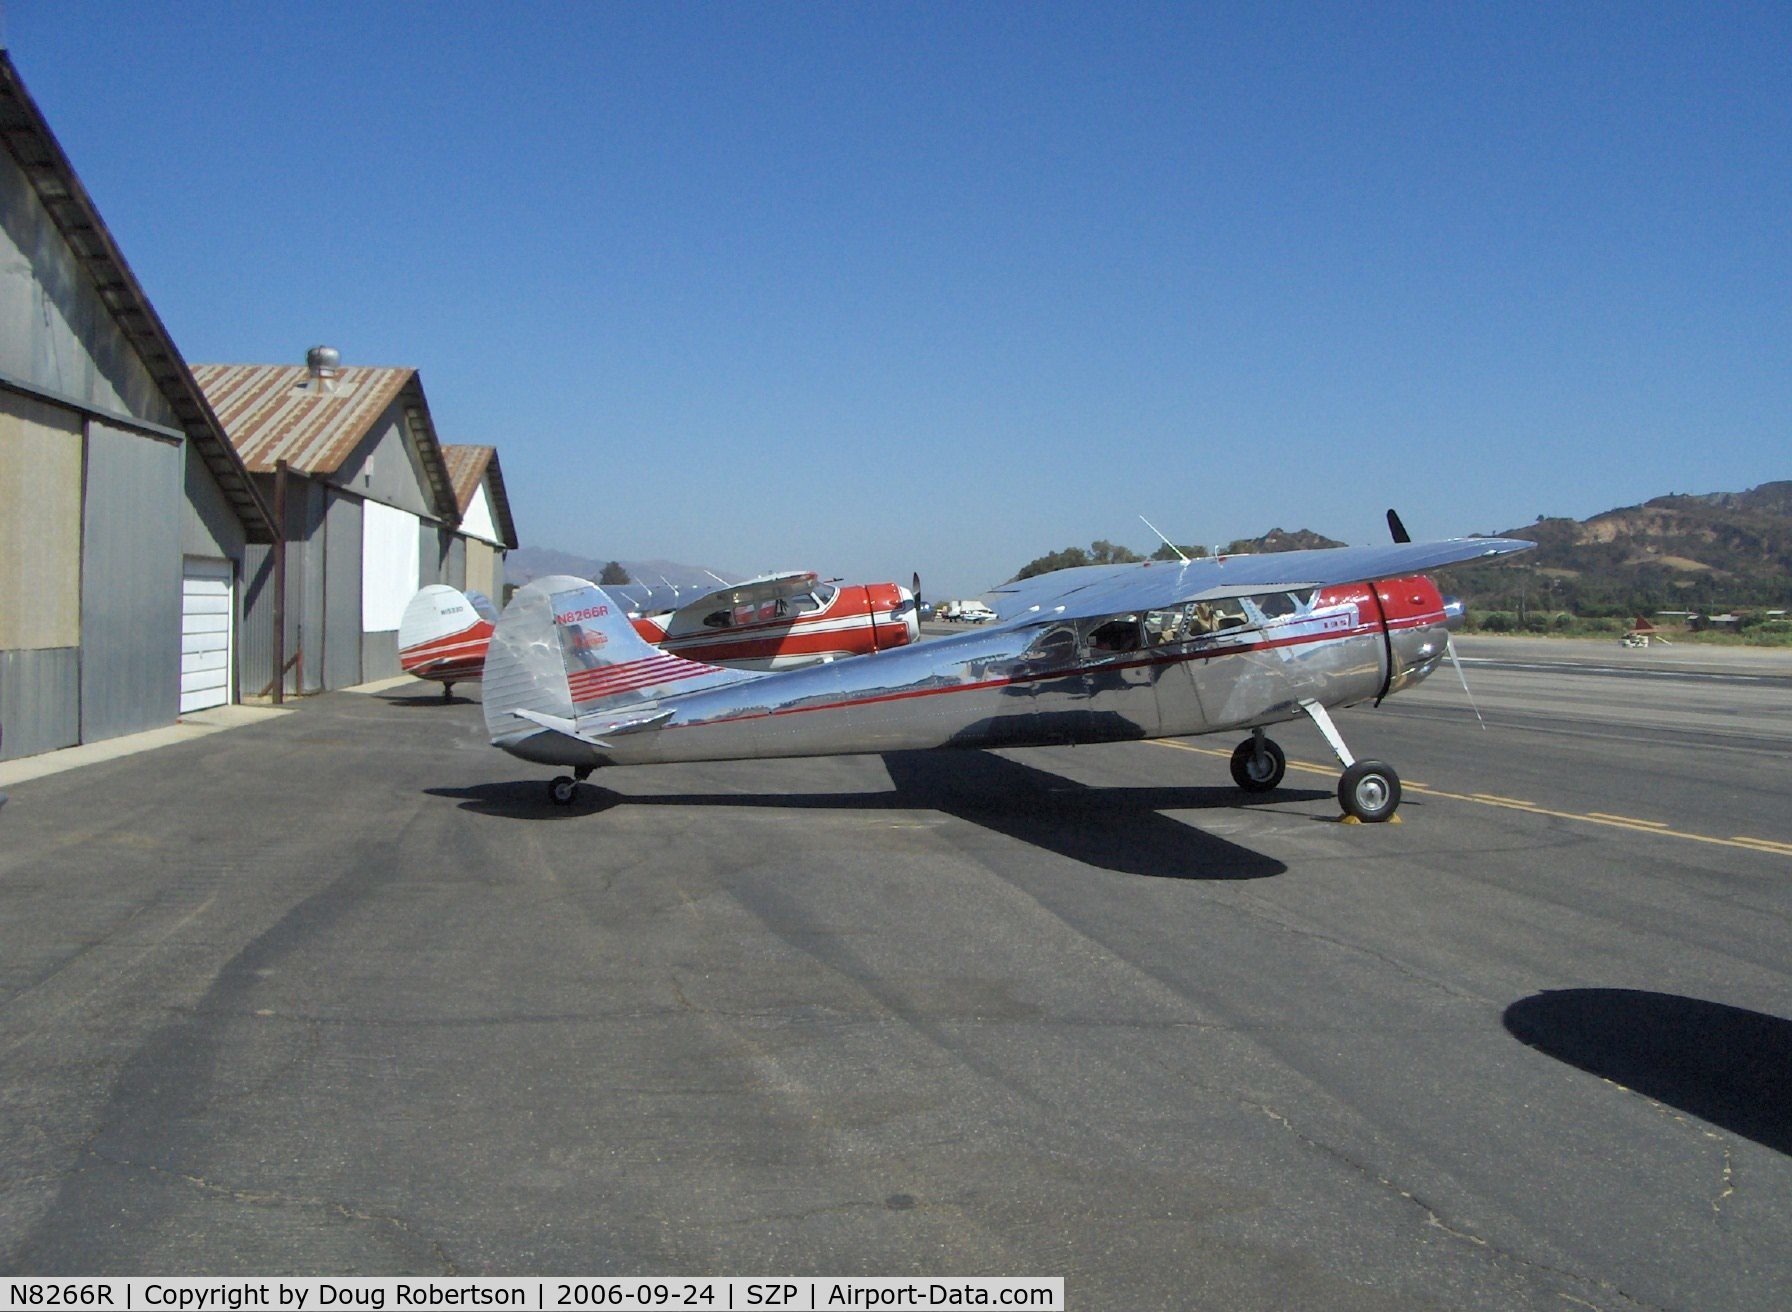 N8266R, 1949 Cessna 195 C/N 7550, 1949 Cessna 195A BUSINESSLINER, Jacobs R755A 300 Hp, incredible polished finish